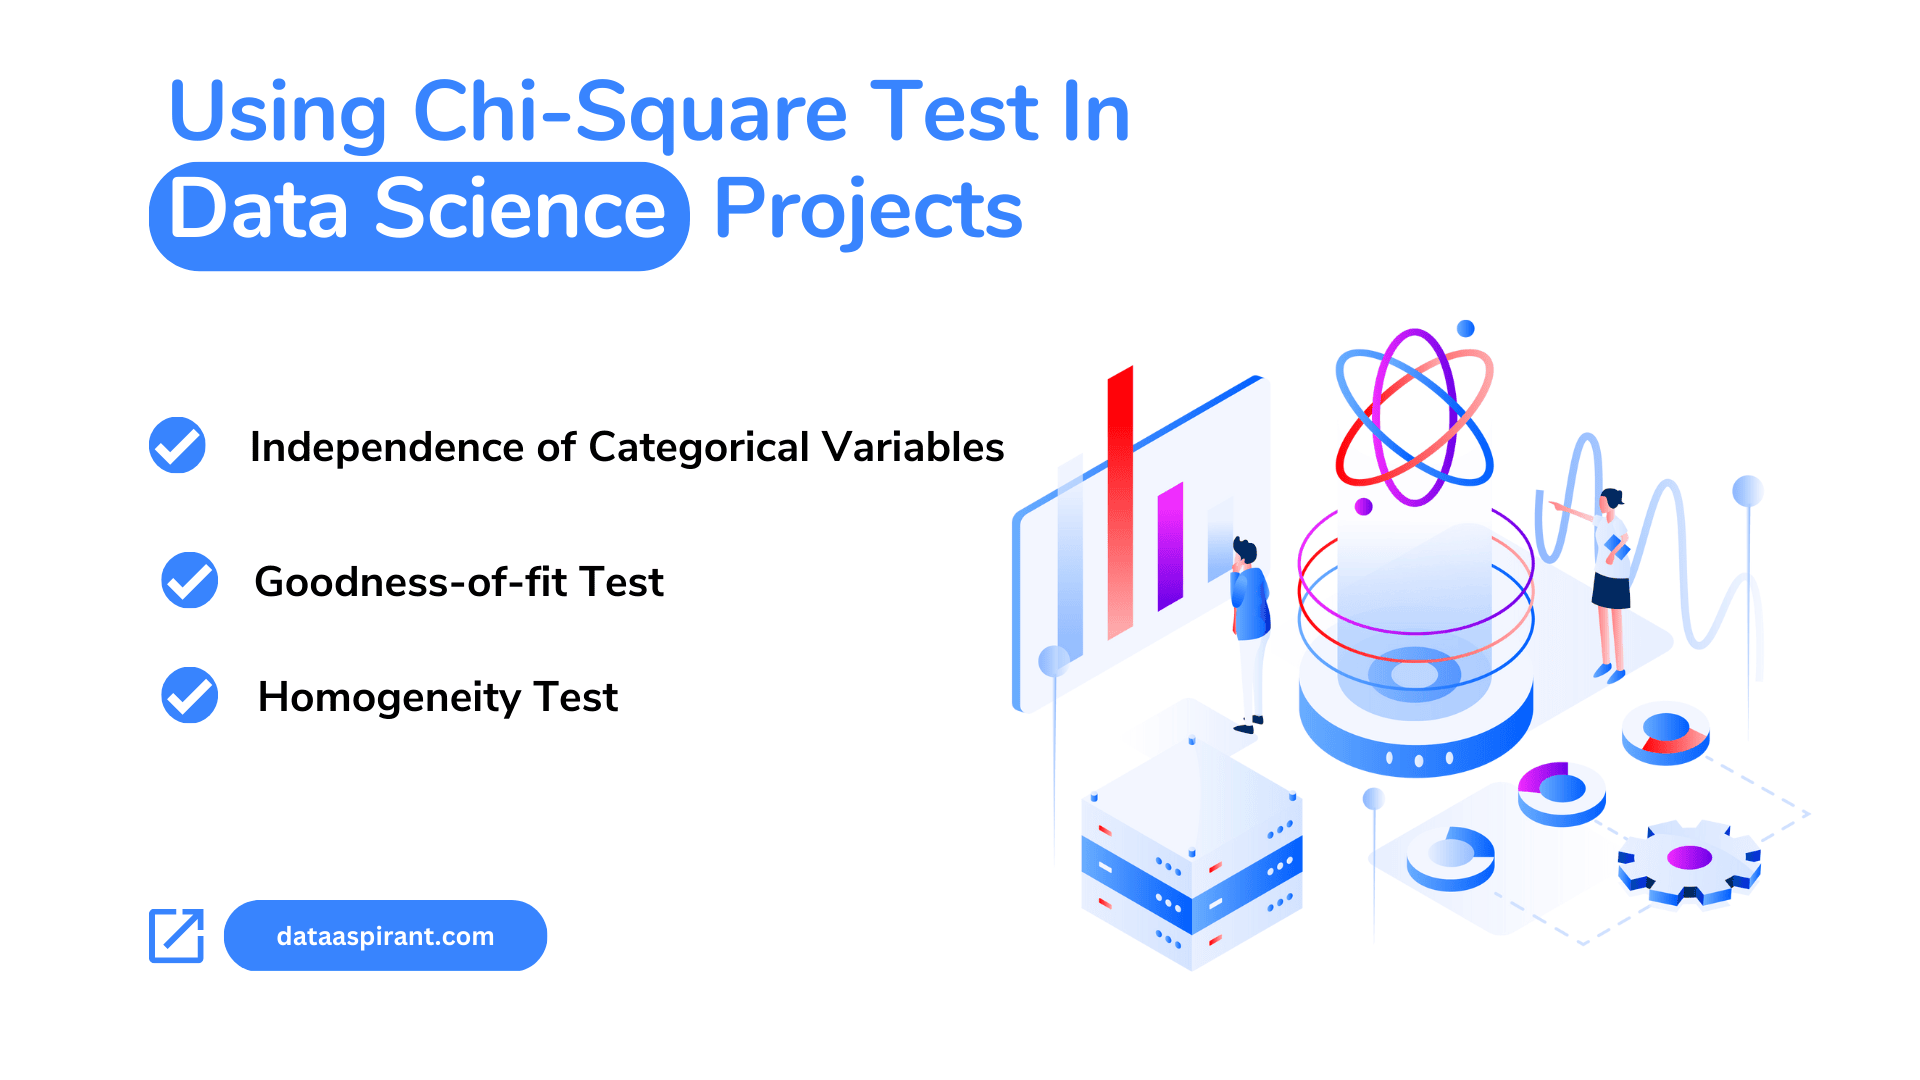 How Chi-square Test Used In Data Science Projects